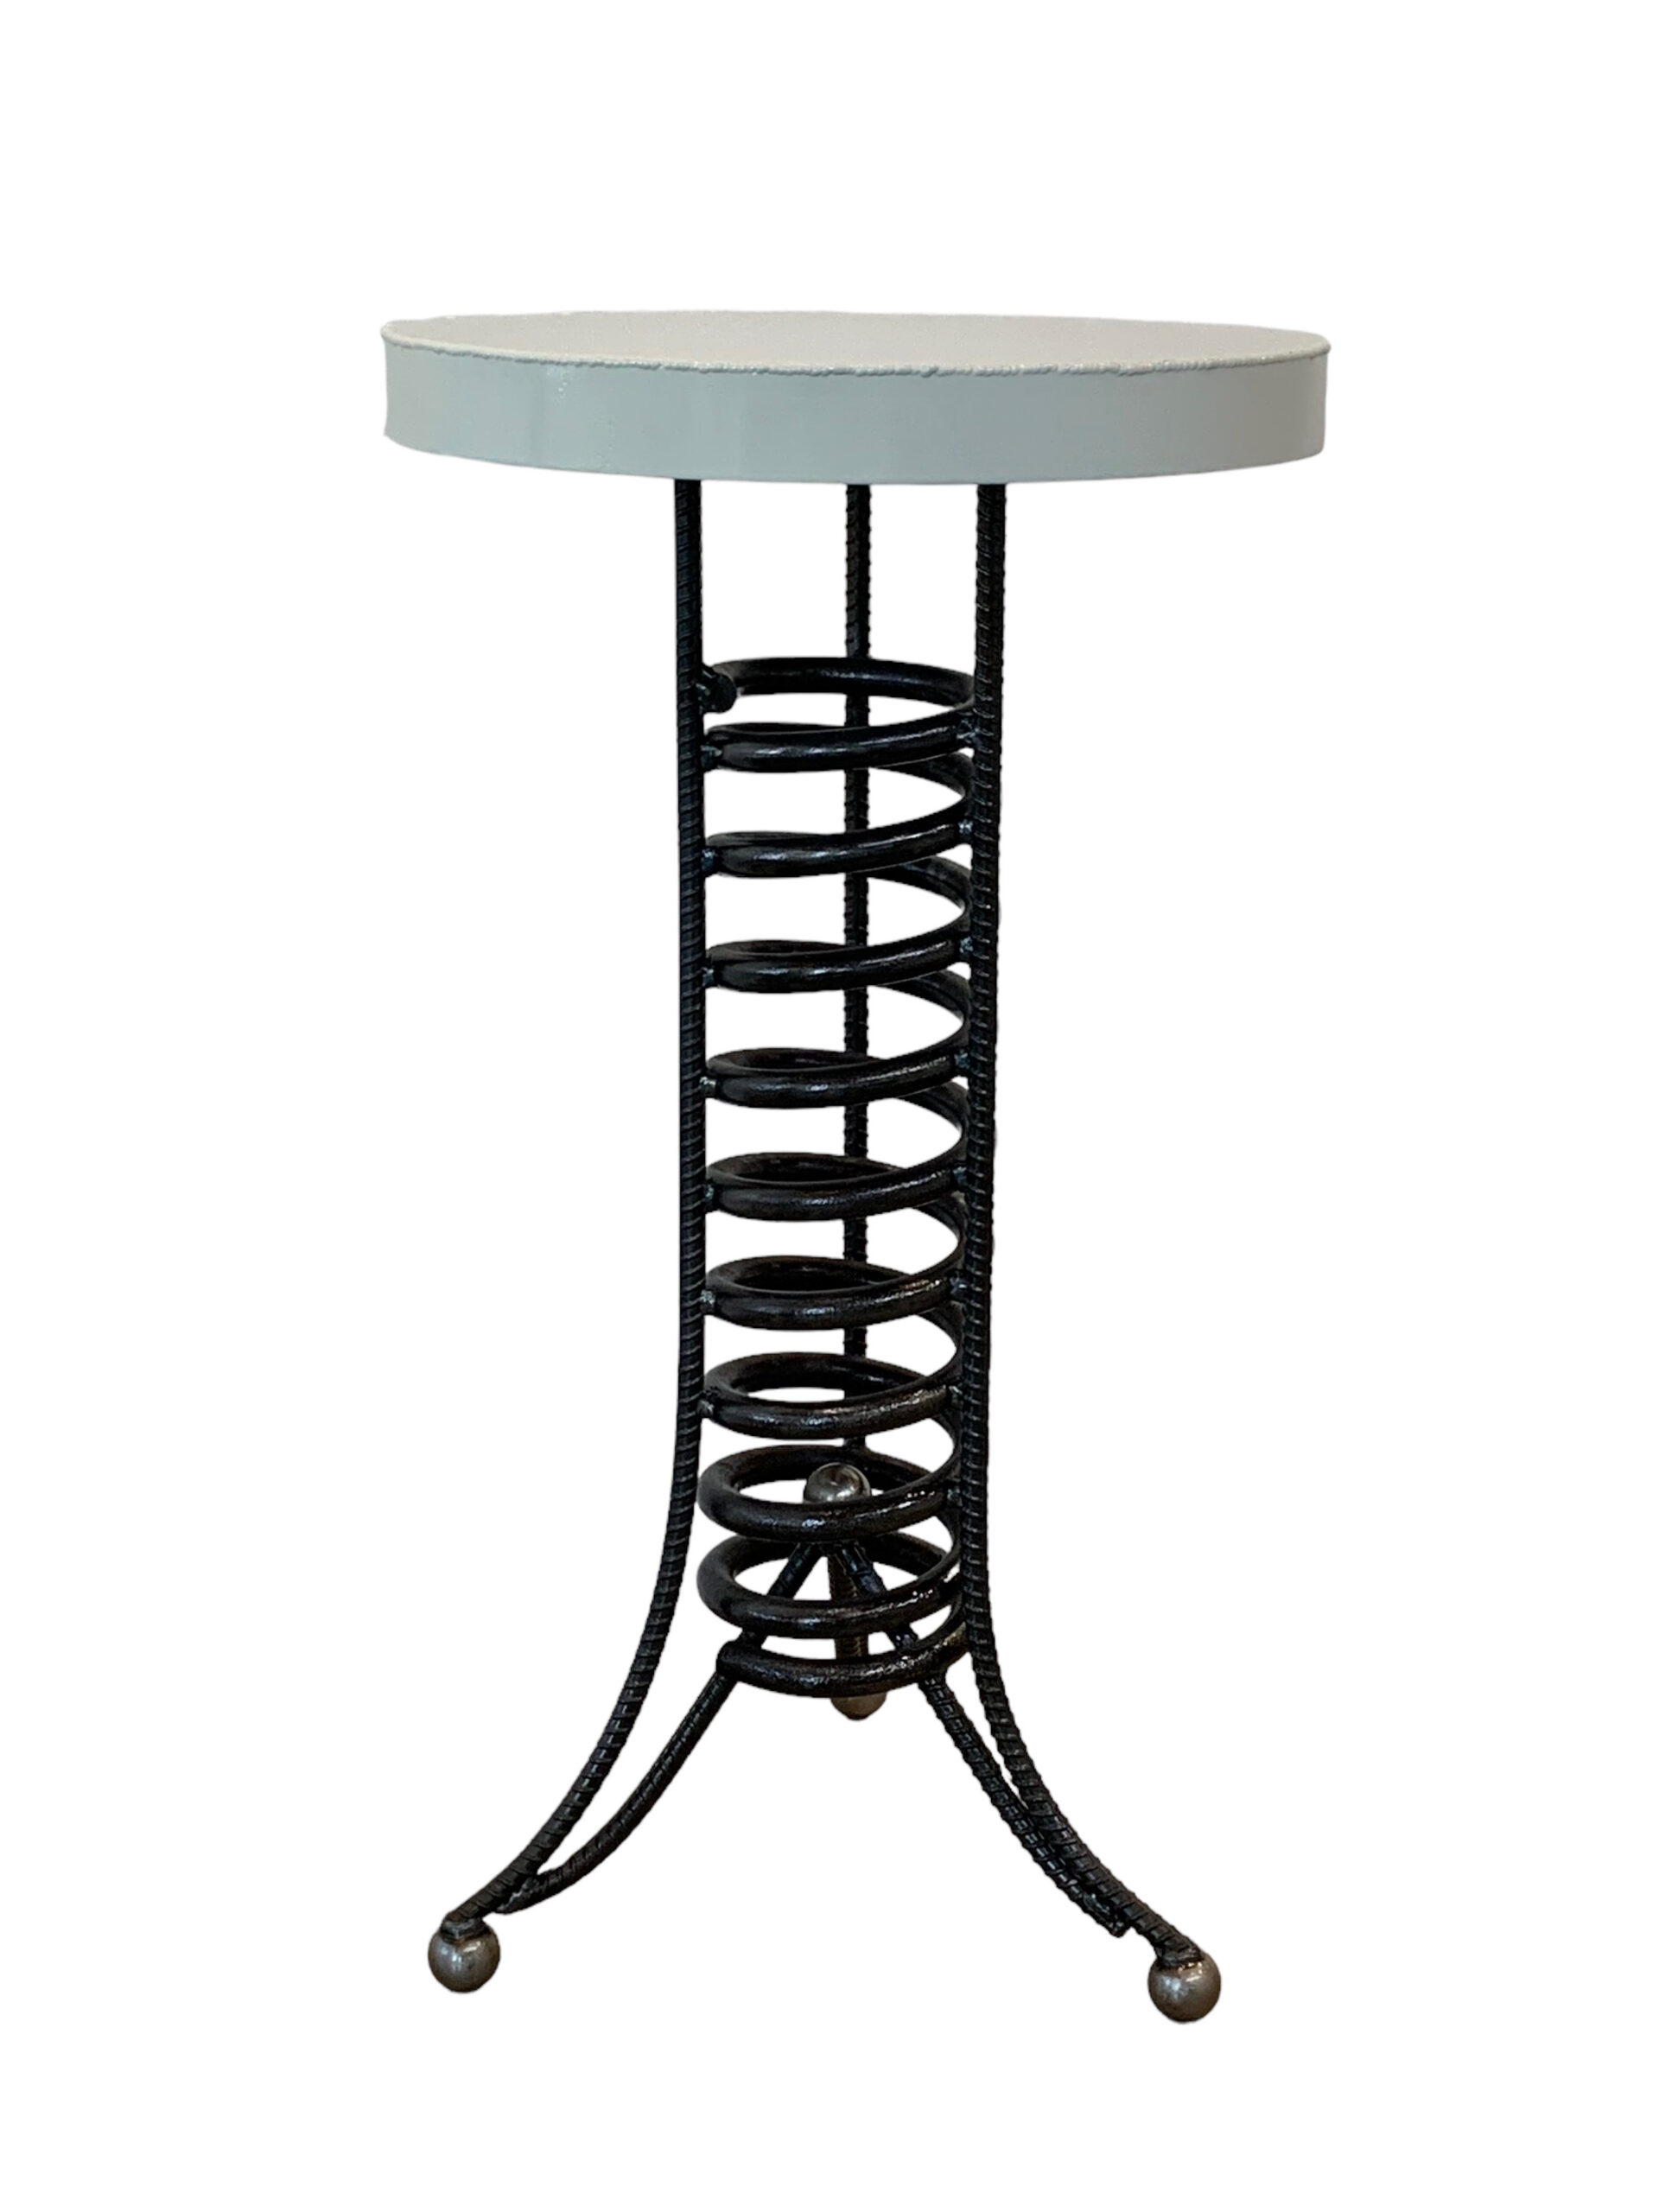 Reclaimed metal side table with a black spiral base and round cream top by artist Wendy Stone.